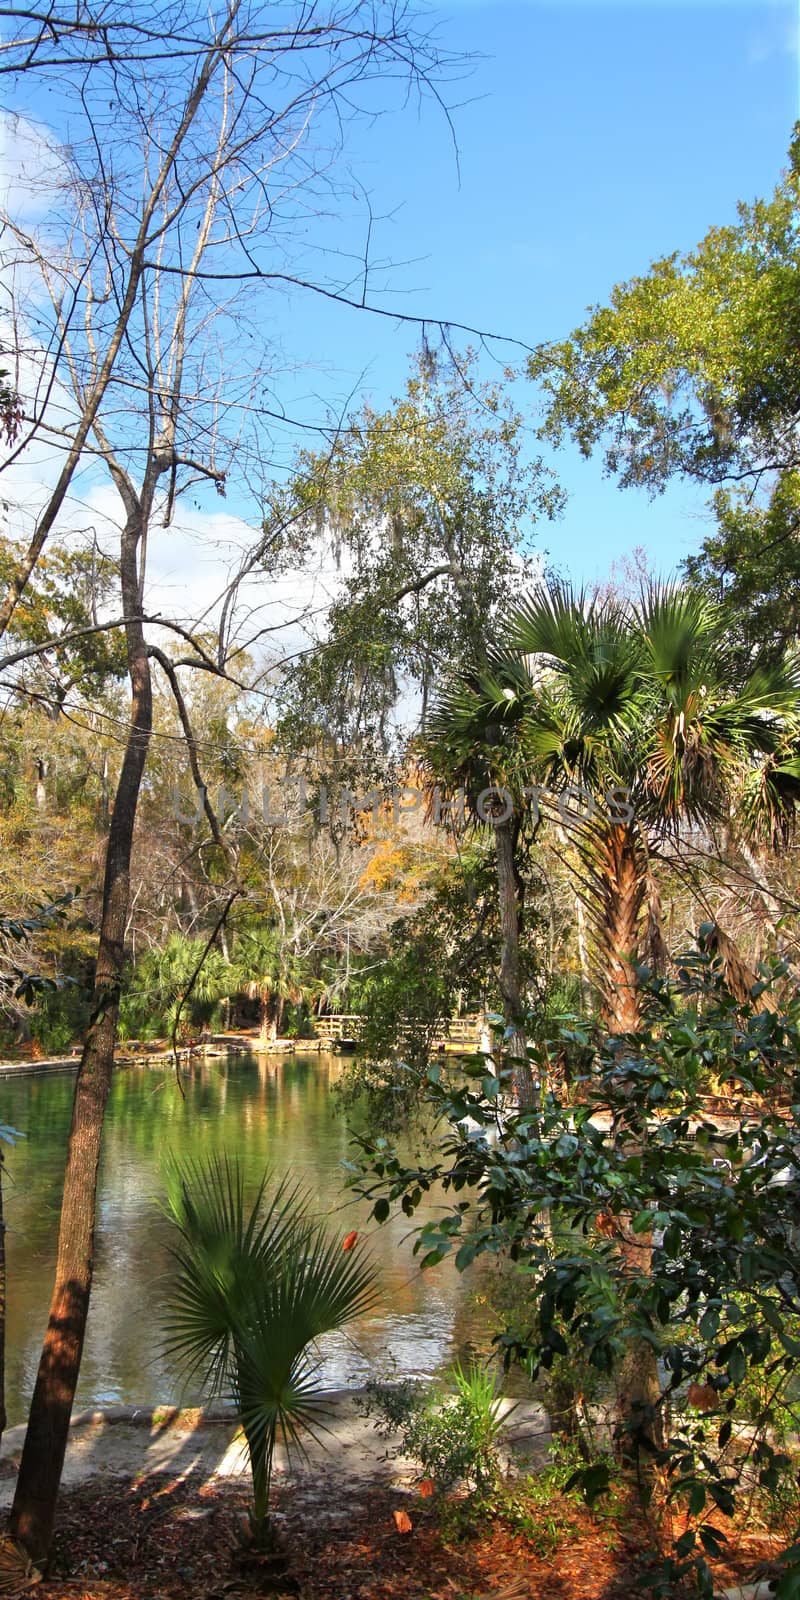 View of the clear waters of Wekiwa Springs State Park in central Florida.